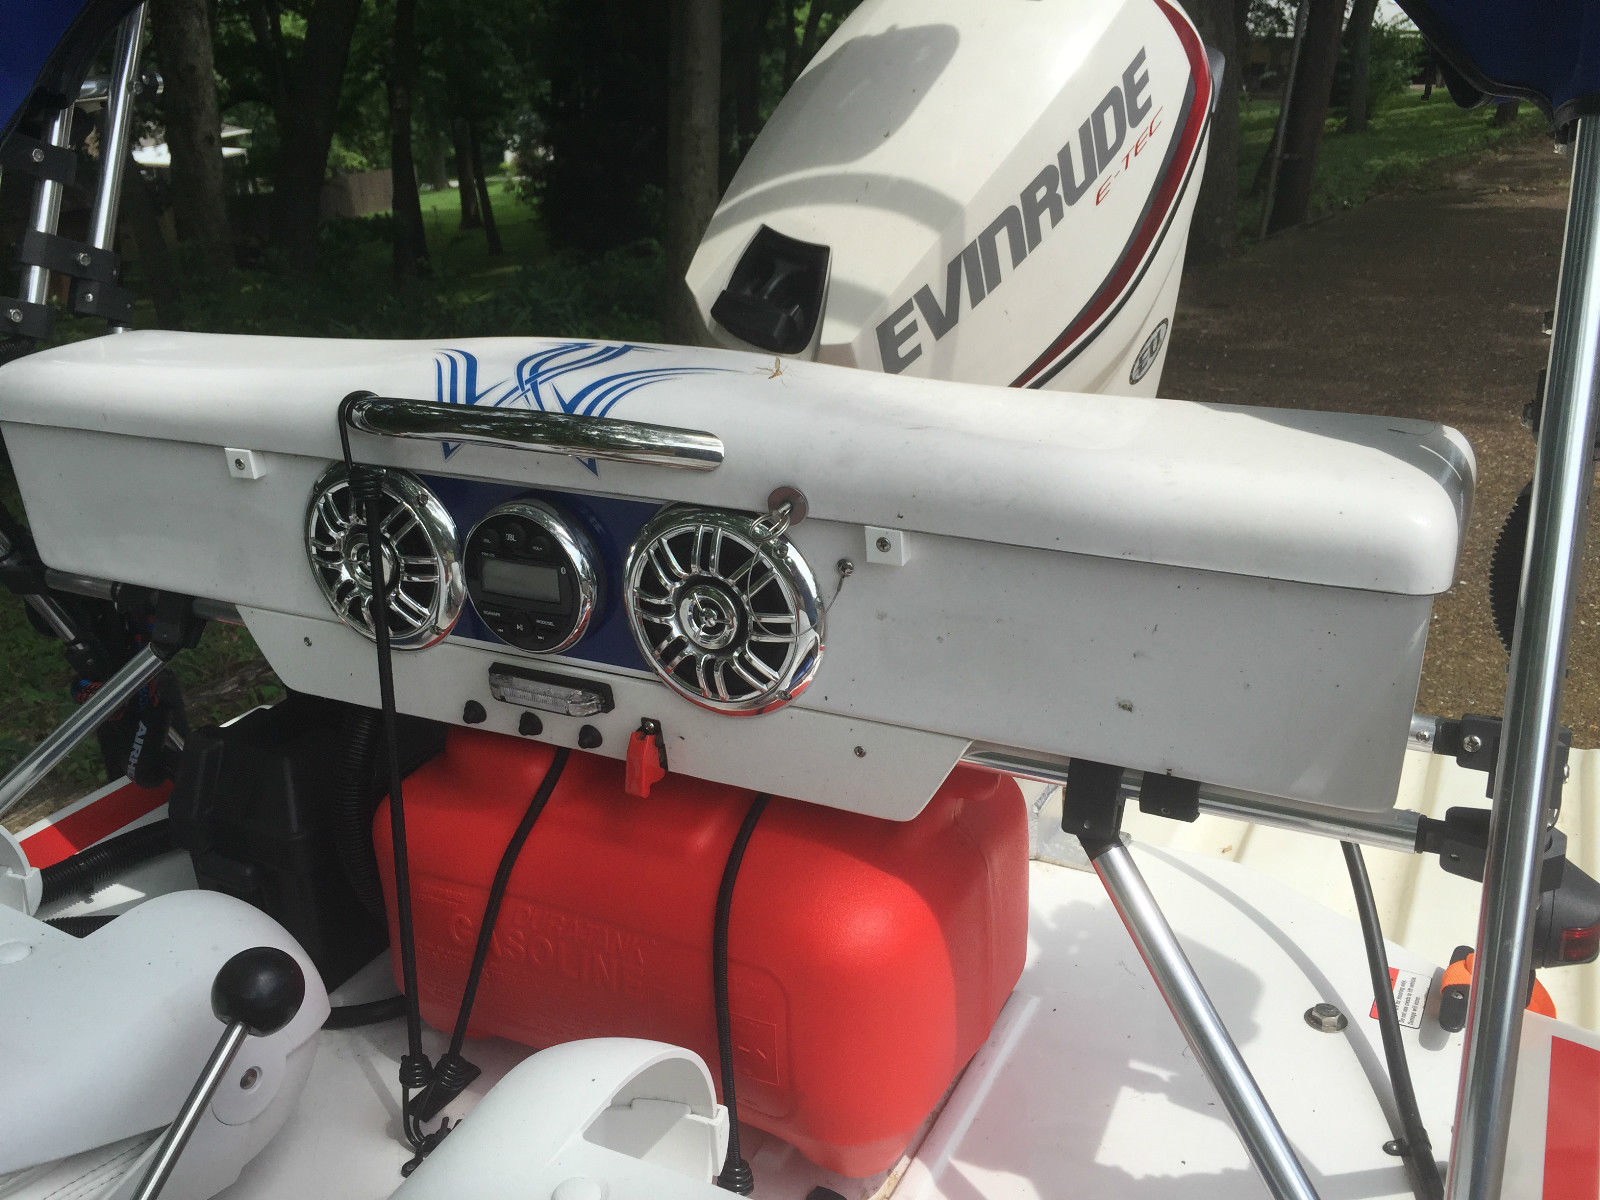 CraigCat E2 Elite 2014 for sale for $7,900 - Boats-from ...